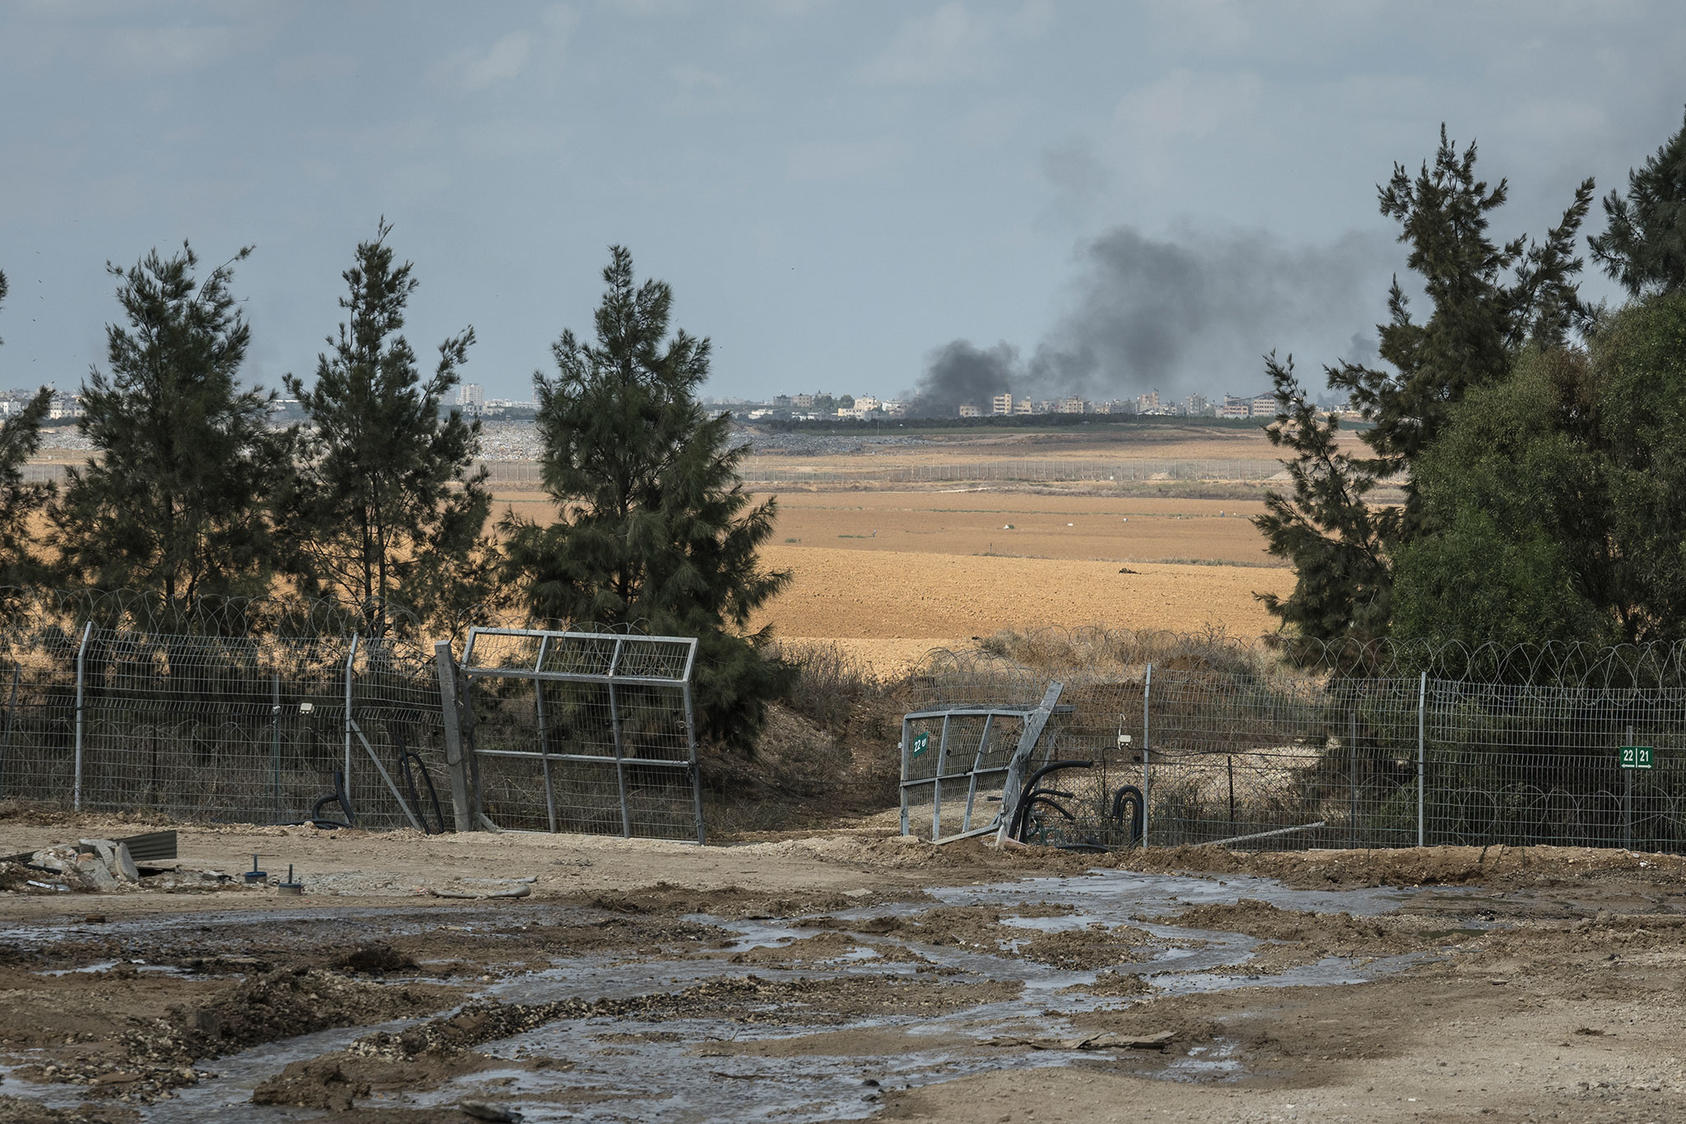 Smoke rises in Gaza City in the distance above the broken security fence at Kfar Azza, a village just across the border from Gaza that was attacked by Palestinian gunmen, in Israel, Tuesday, Oct. 10, 2023. (Sergey Ponomarev/The New York Times)